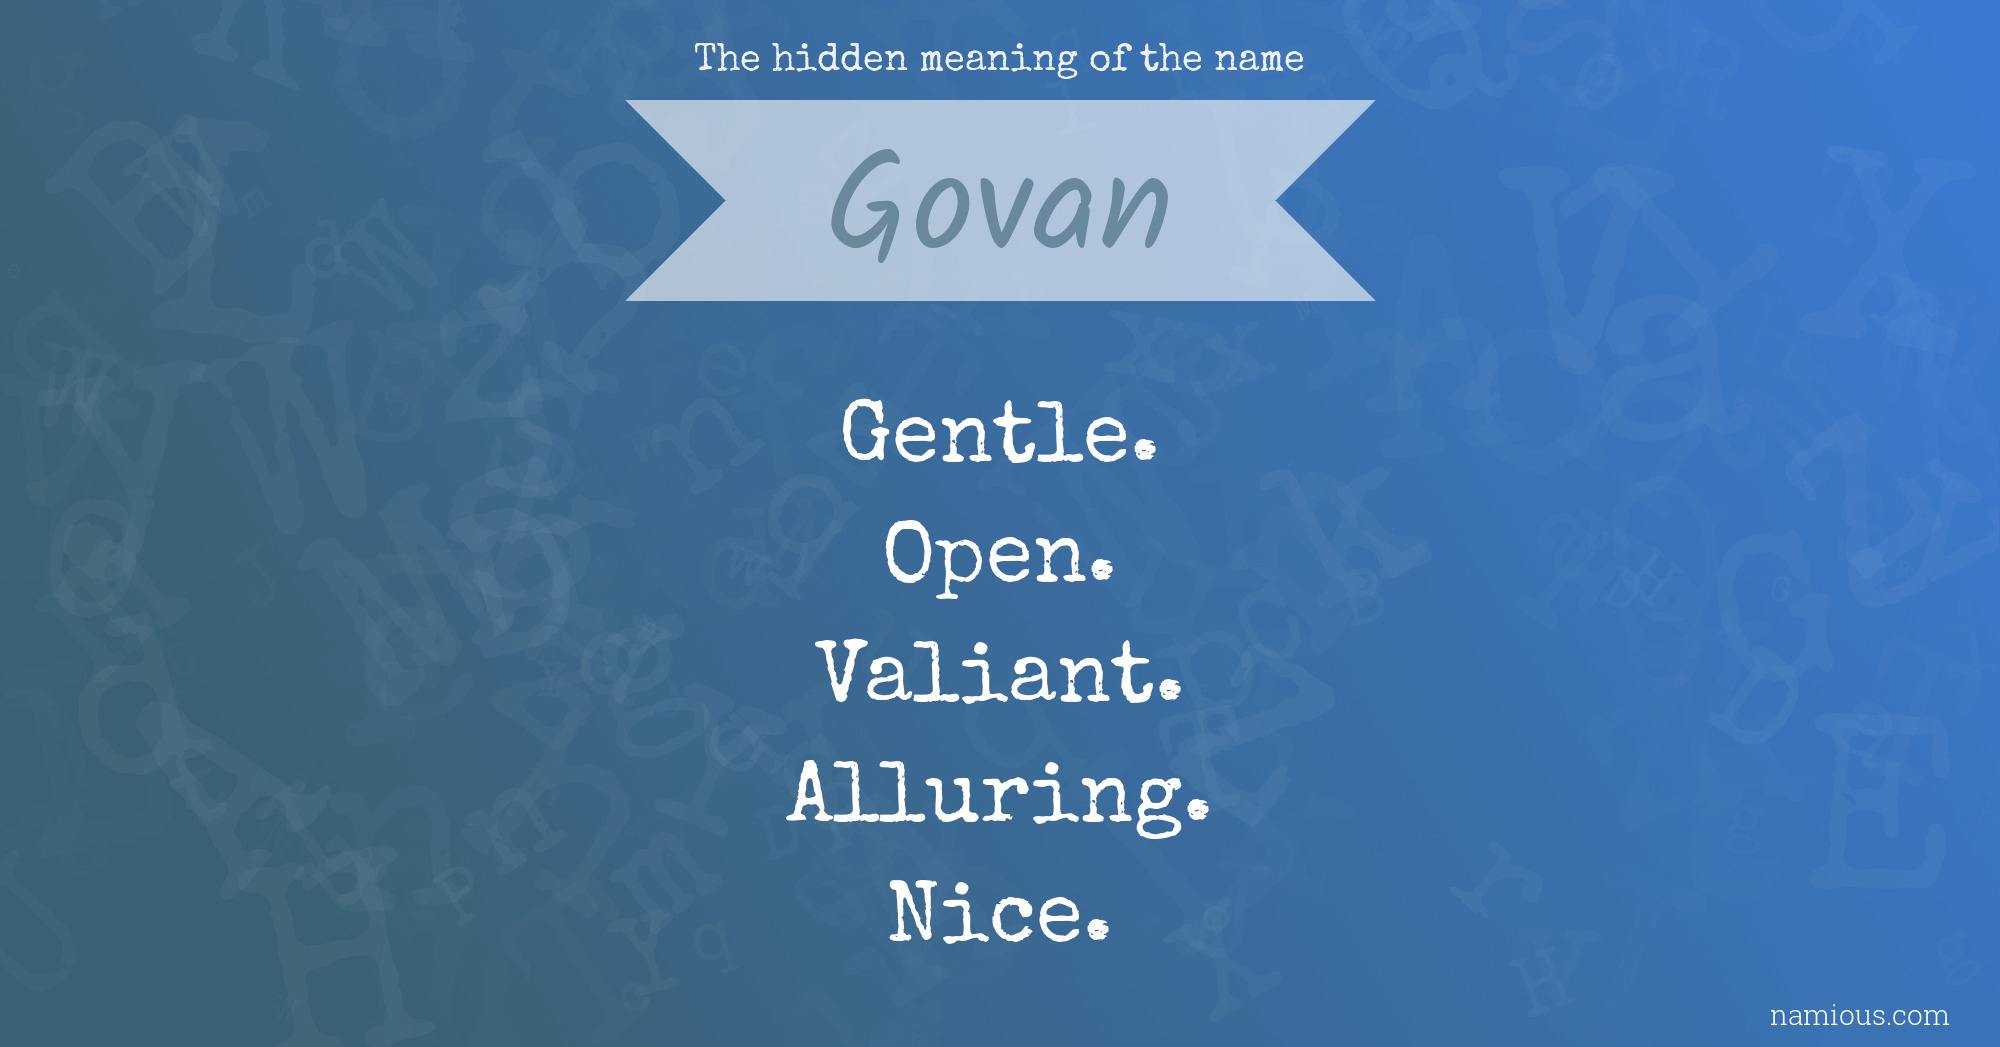 The hidden meaning of the name Govan